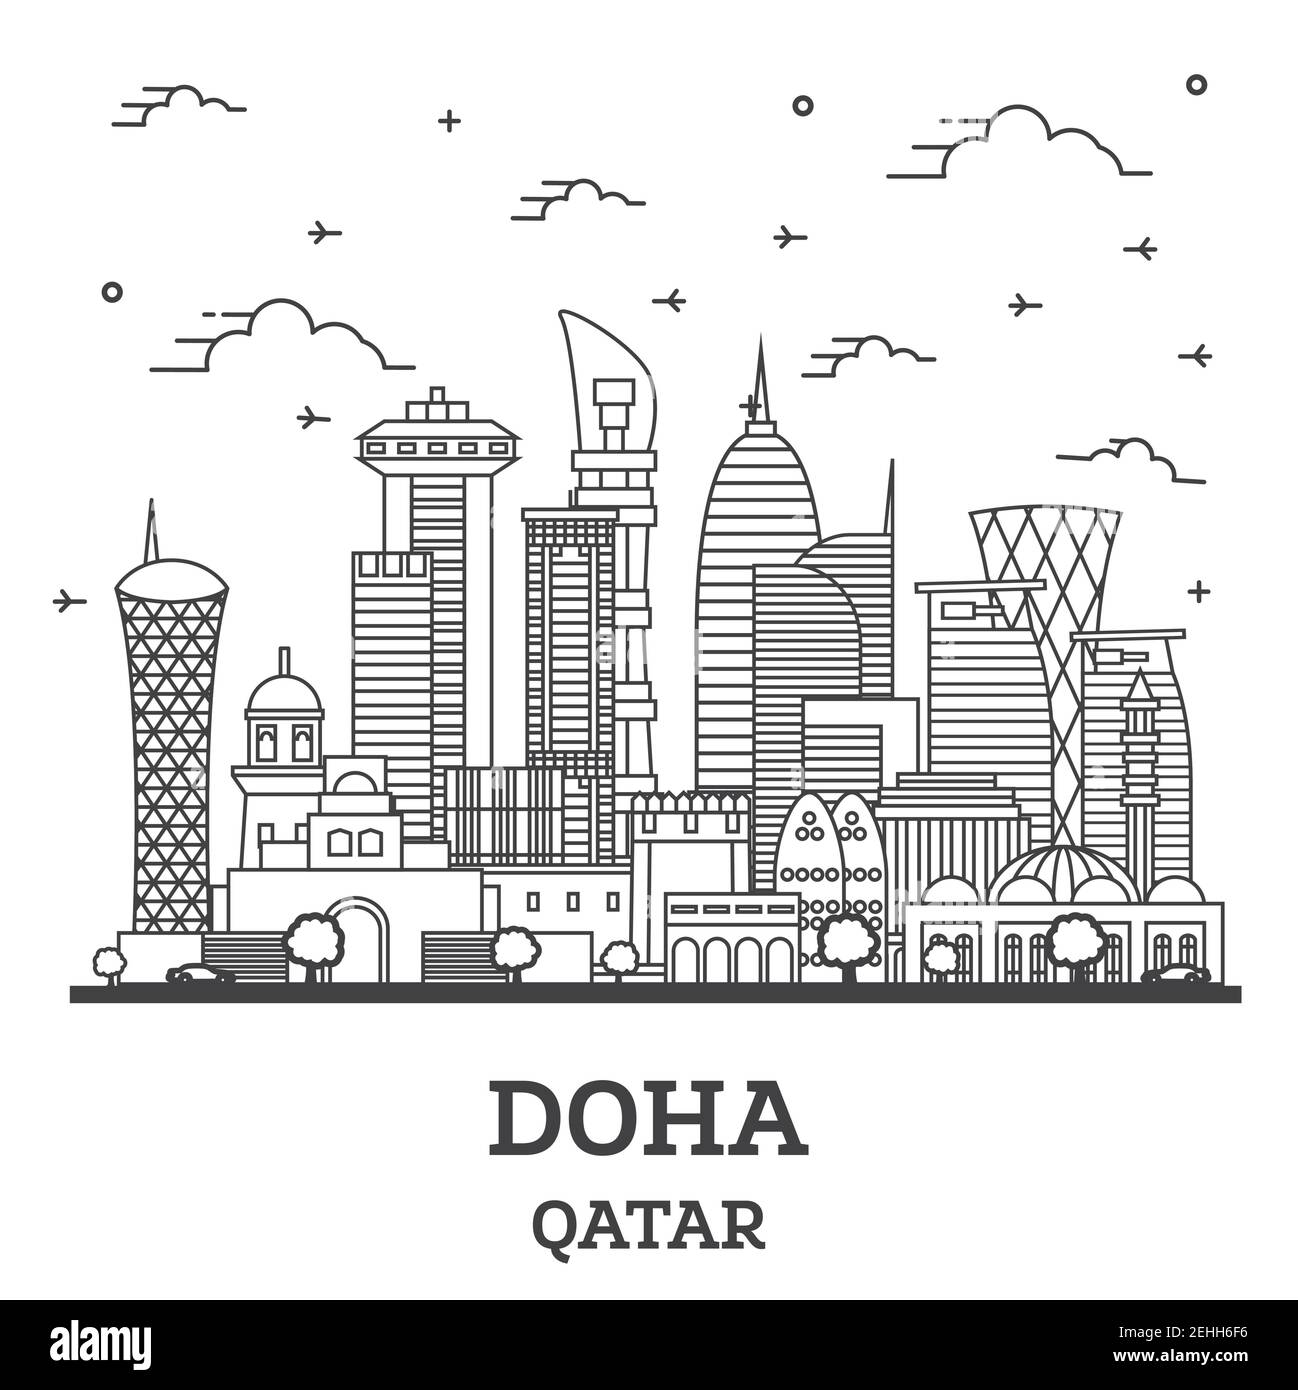 Outline Doha Qatar City Skyline with Modern Buildings Isolated on White. Vector Illustration. Doha Cityscape with Landmarks. Stock Vector